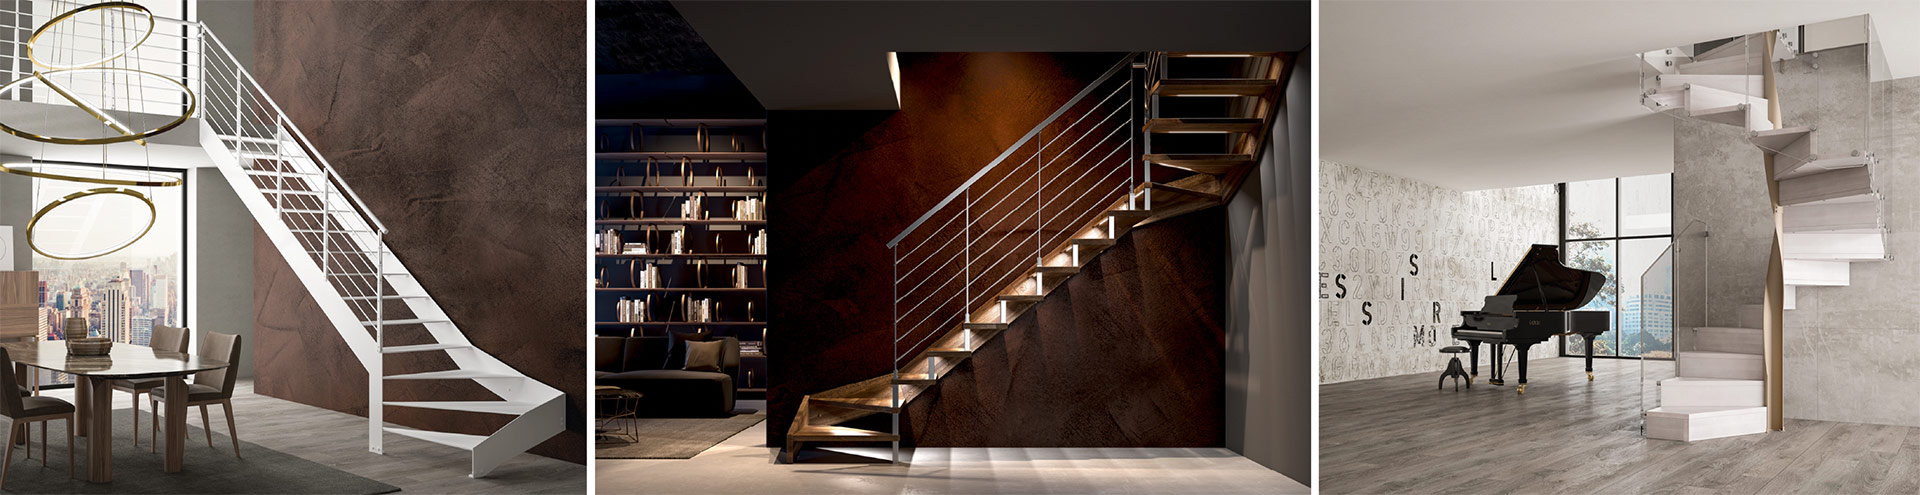 DS design   stairs.